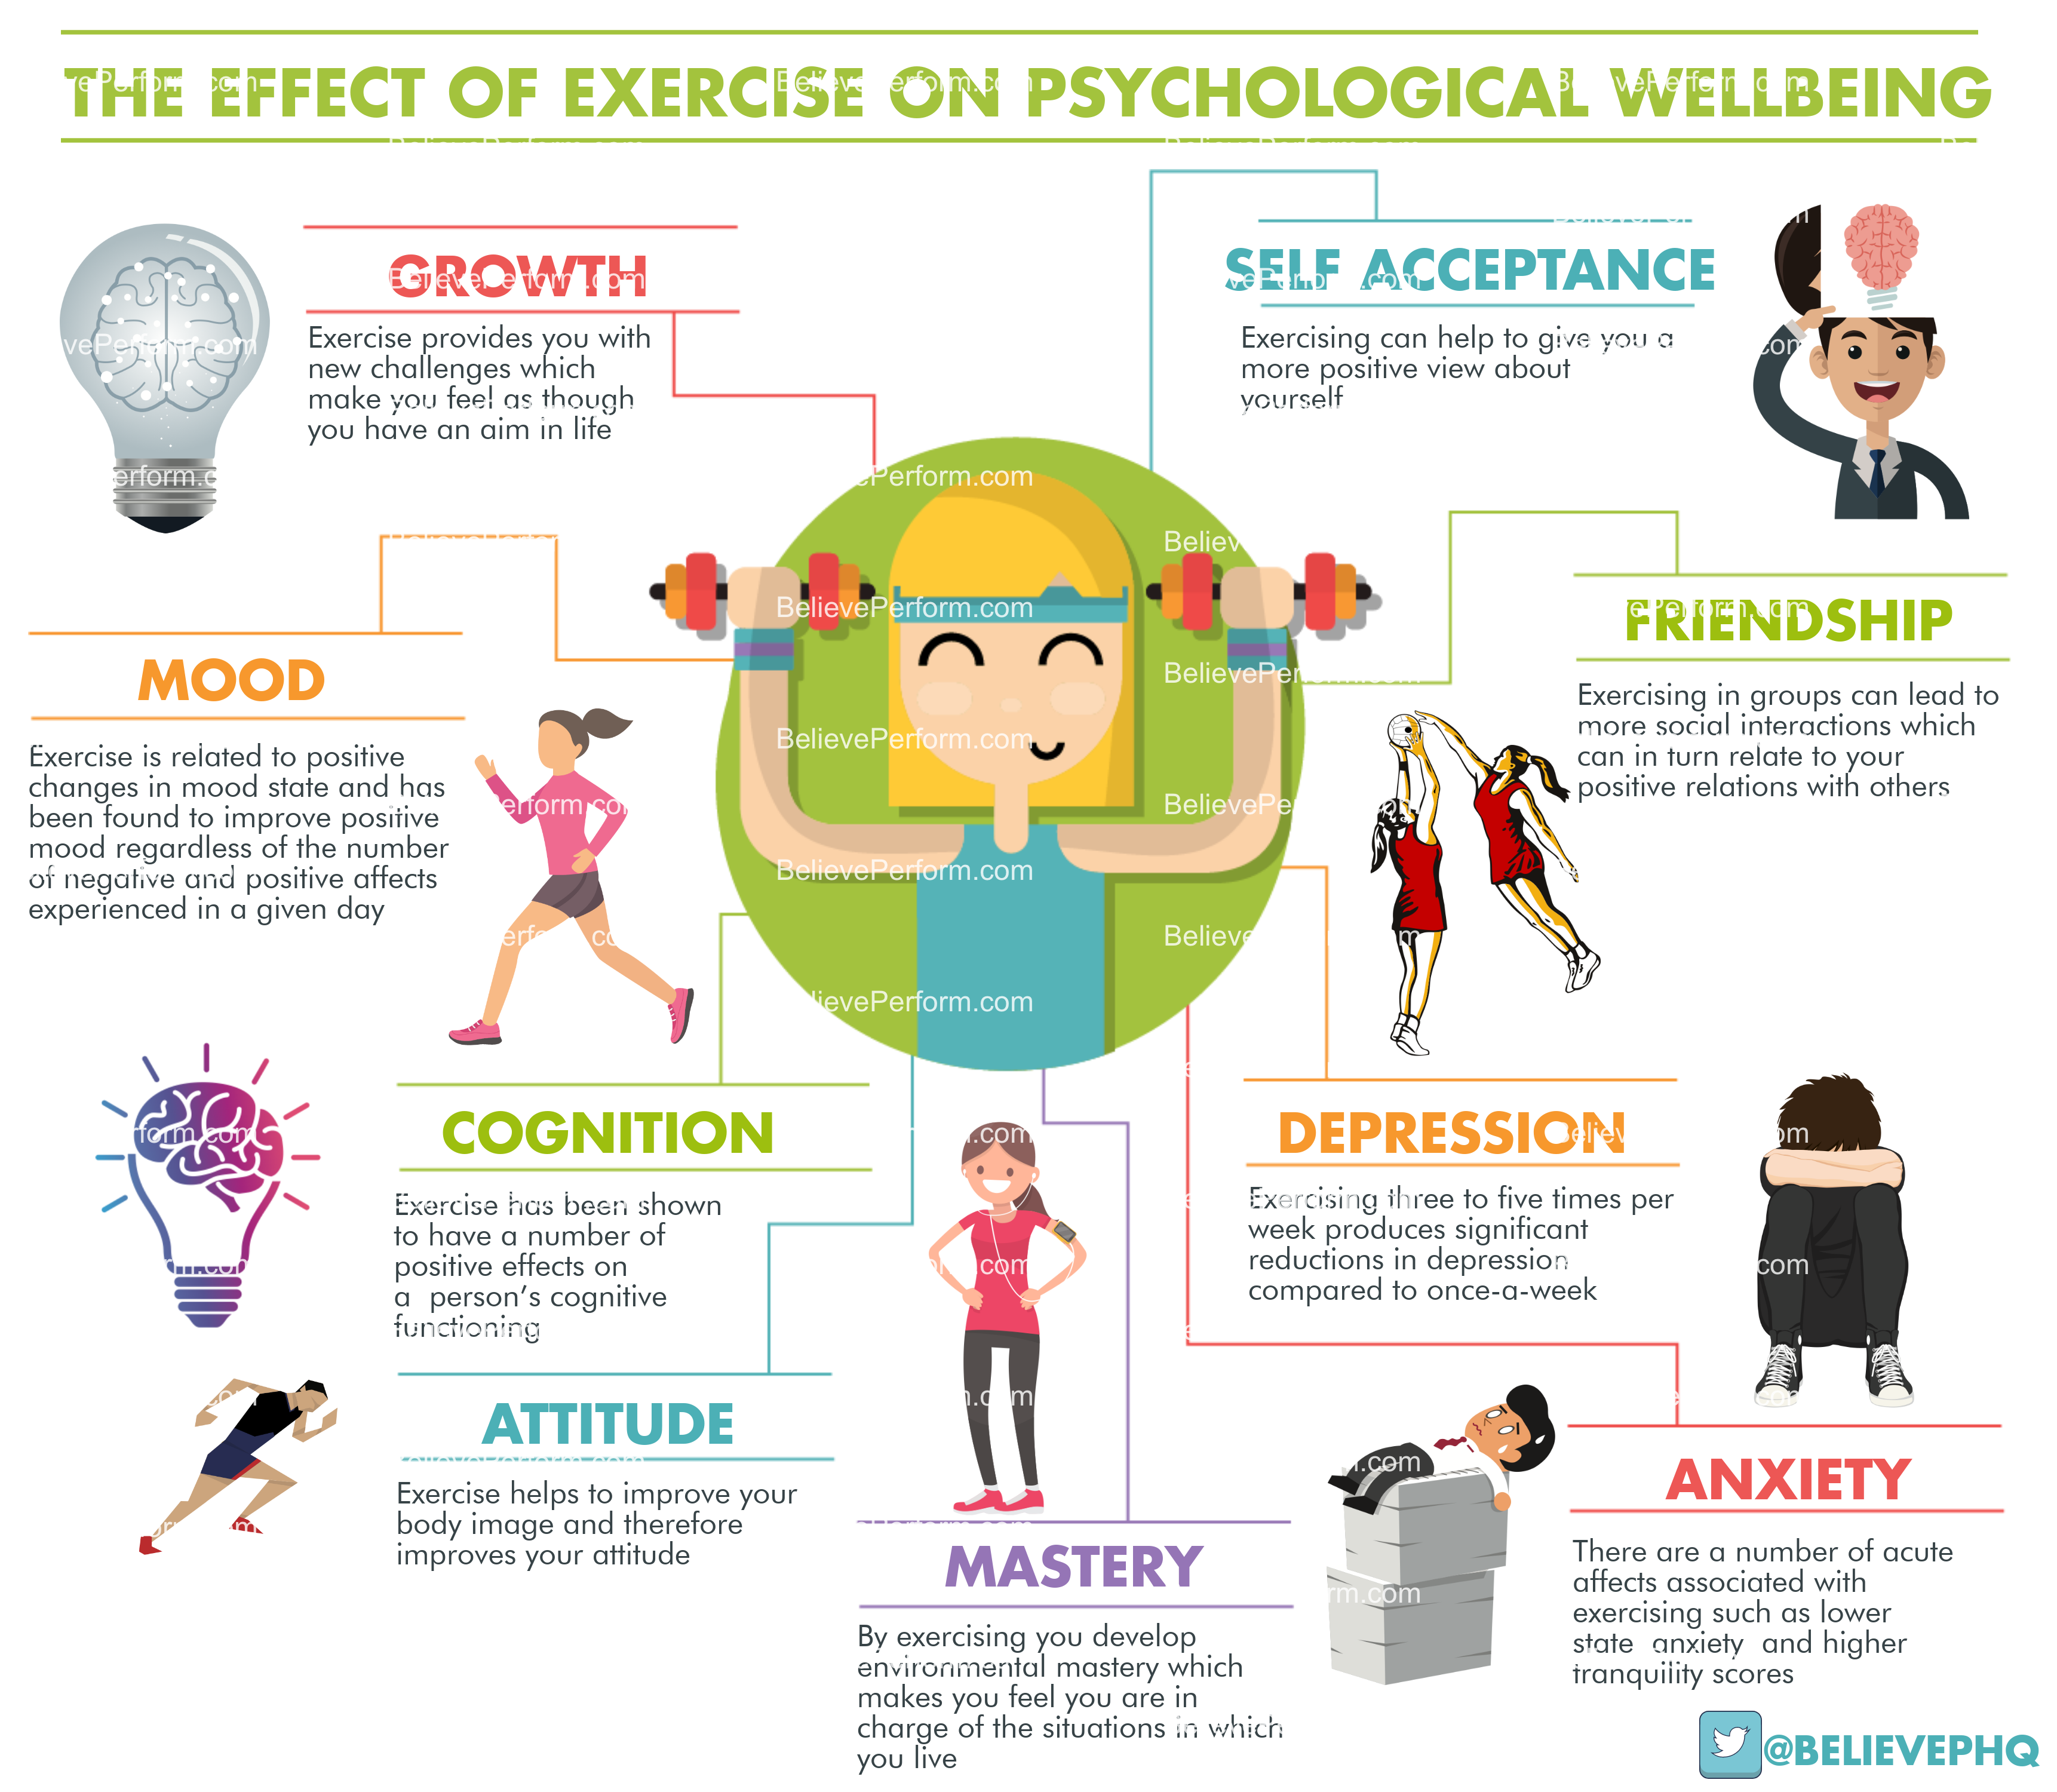 The effect of exercise on psychological wellbeing